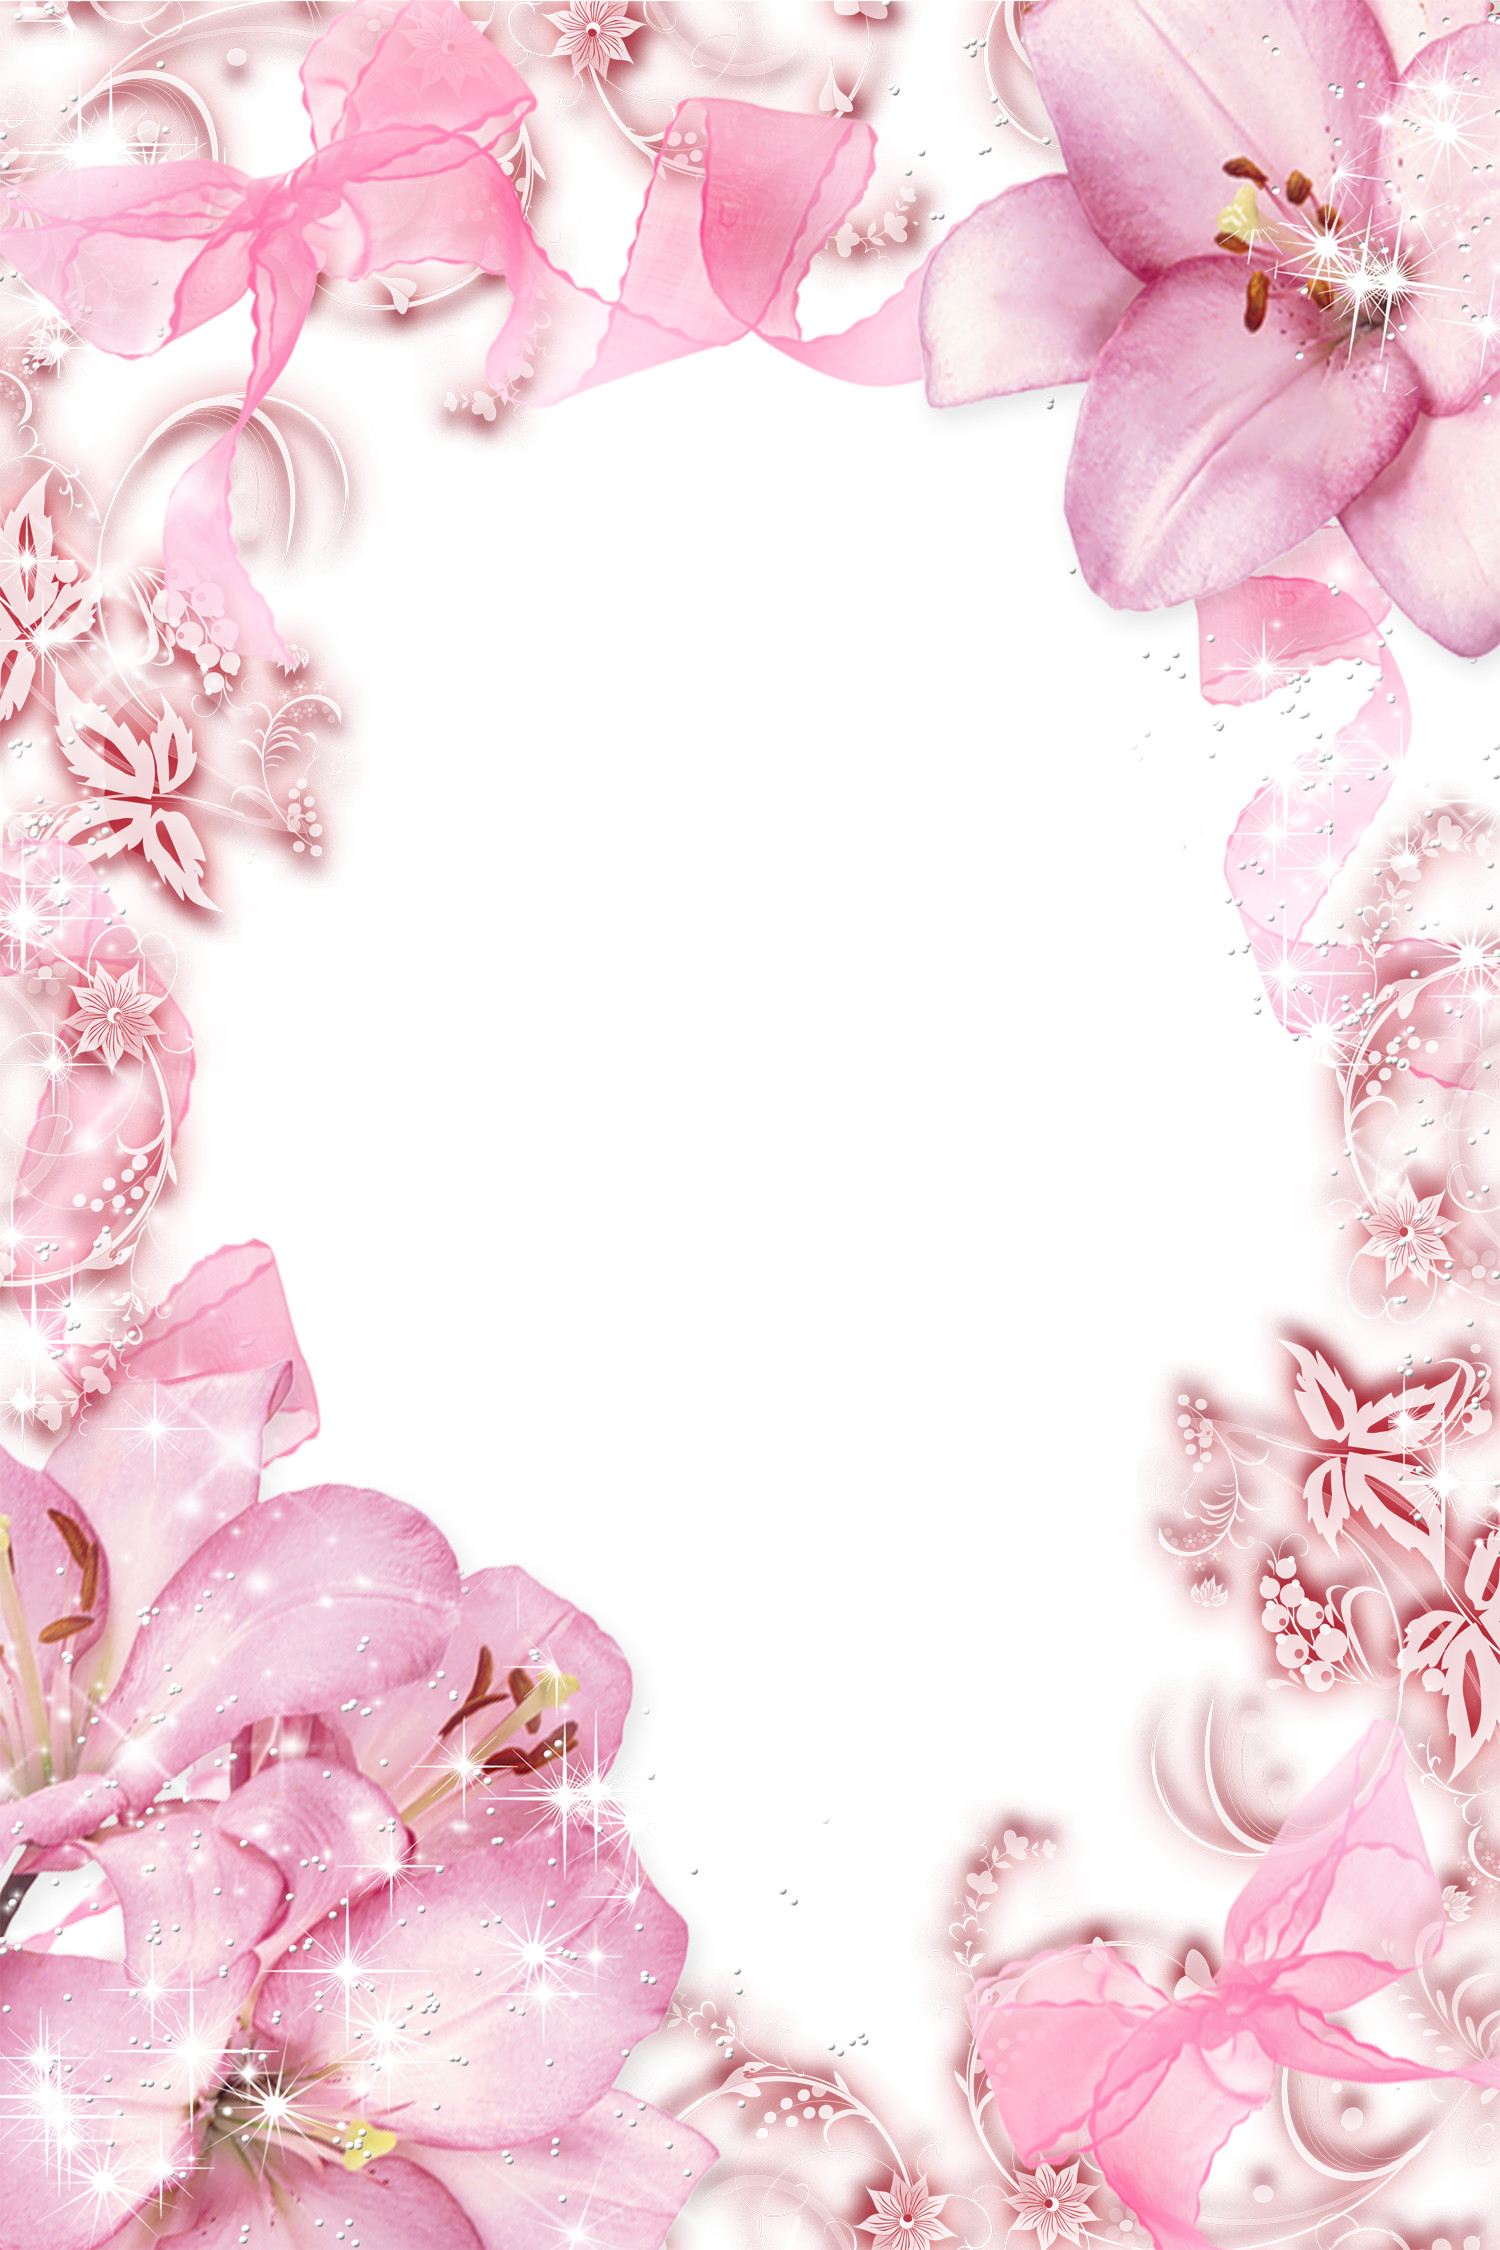 1500x2250 Pink flowers background. Pin by slgudiel on